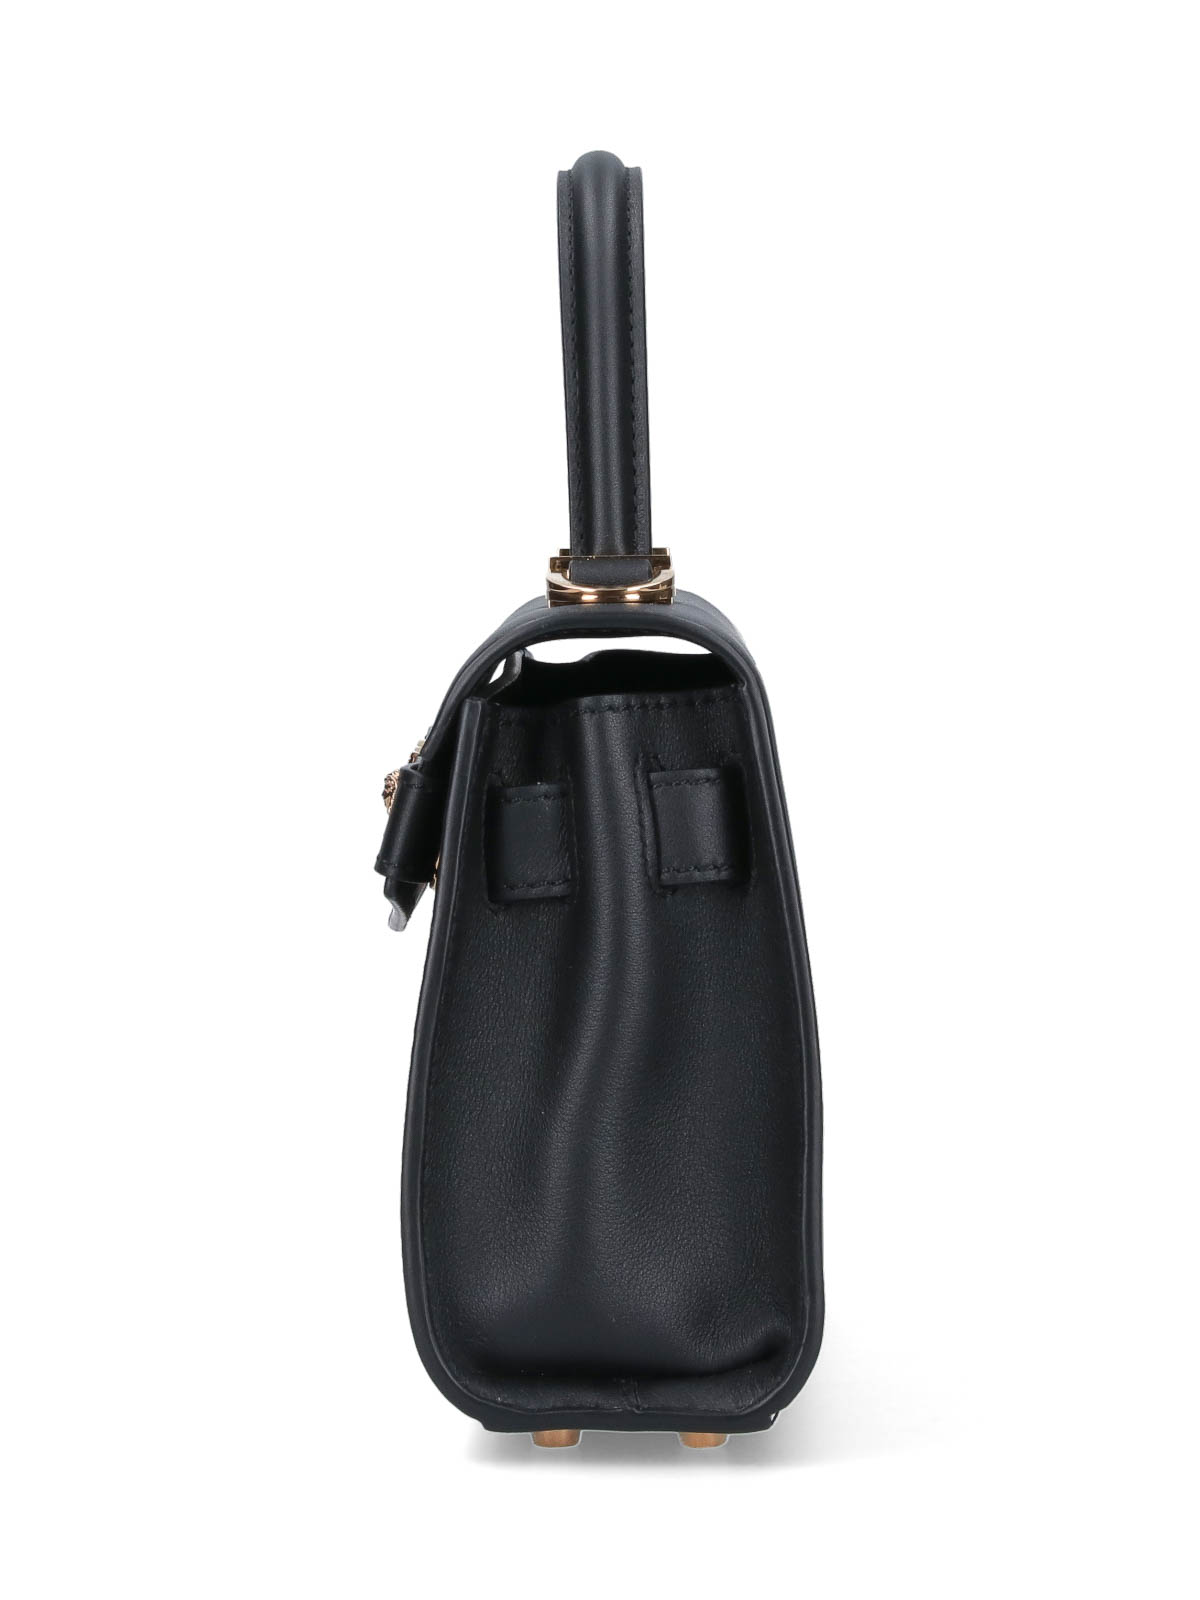 Shop Versace Small Hand Bag In Black